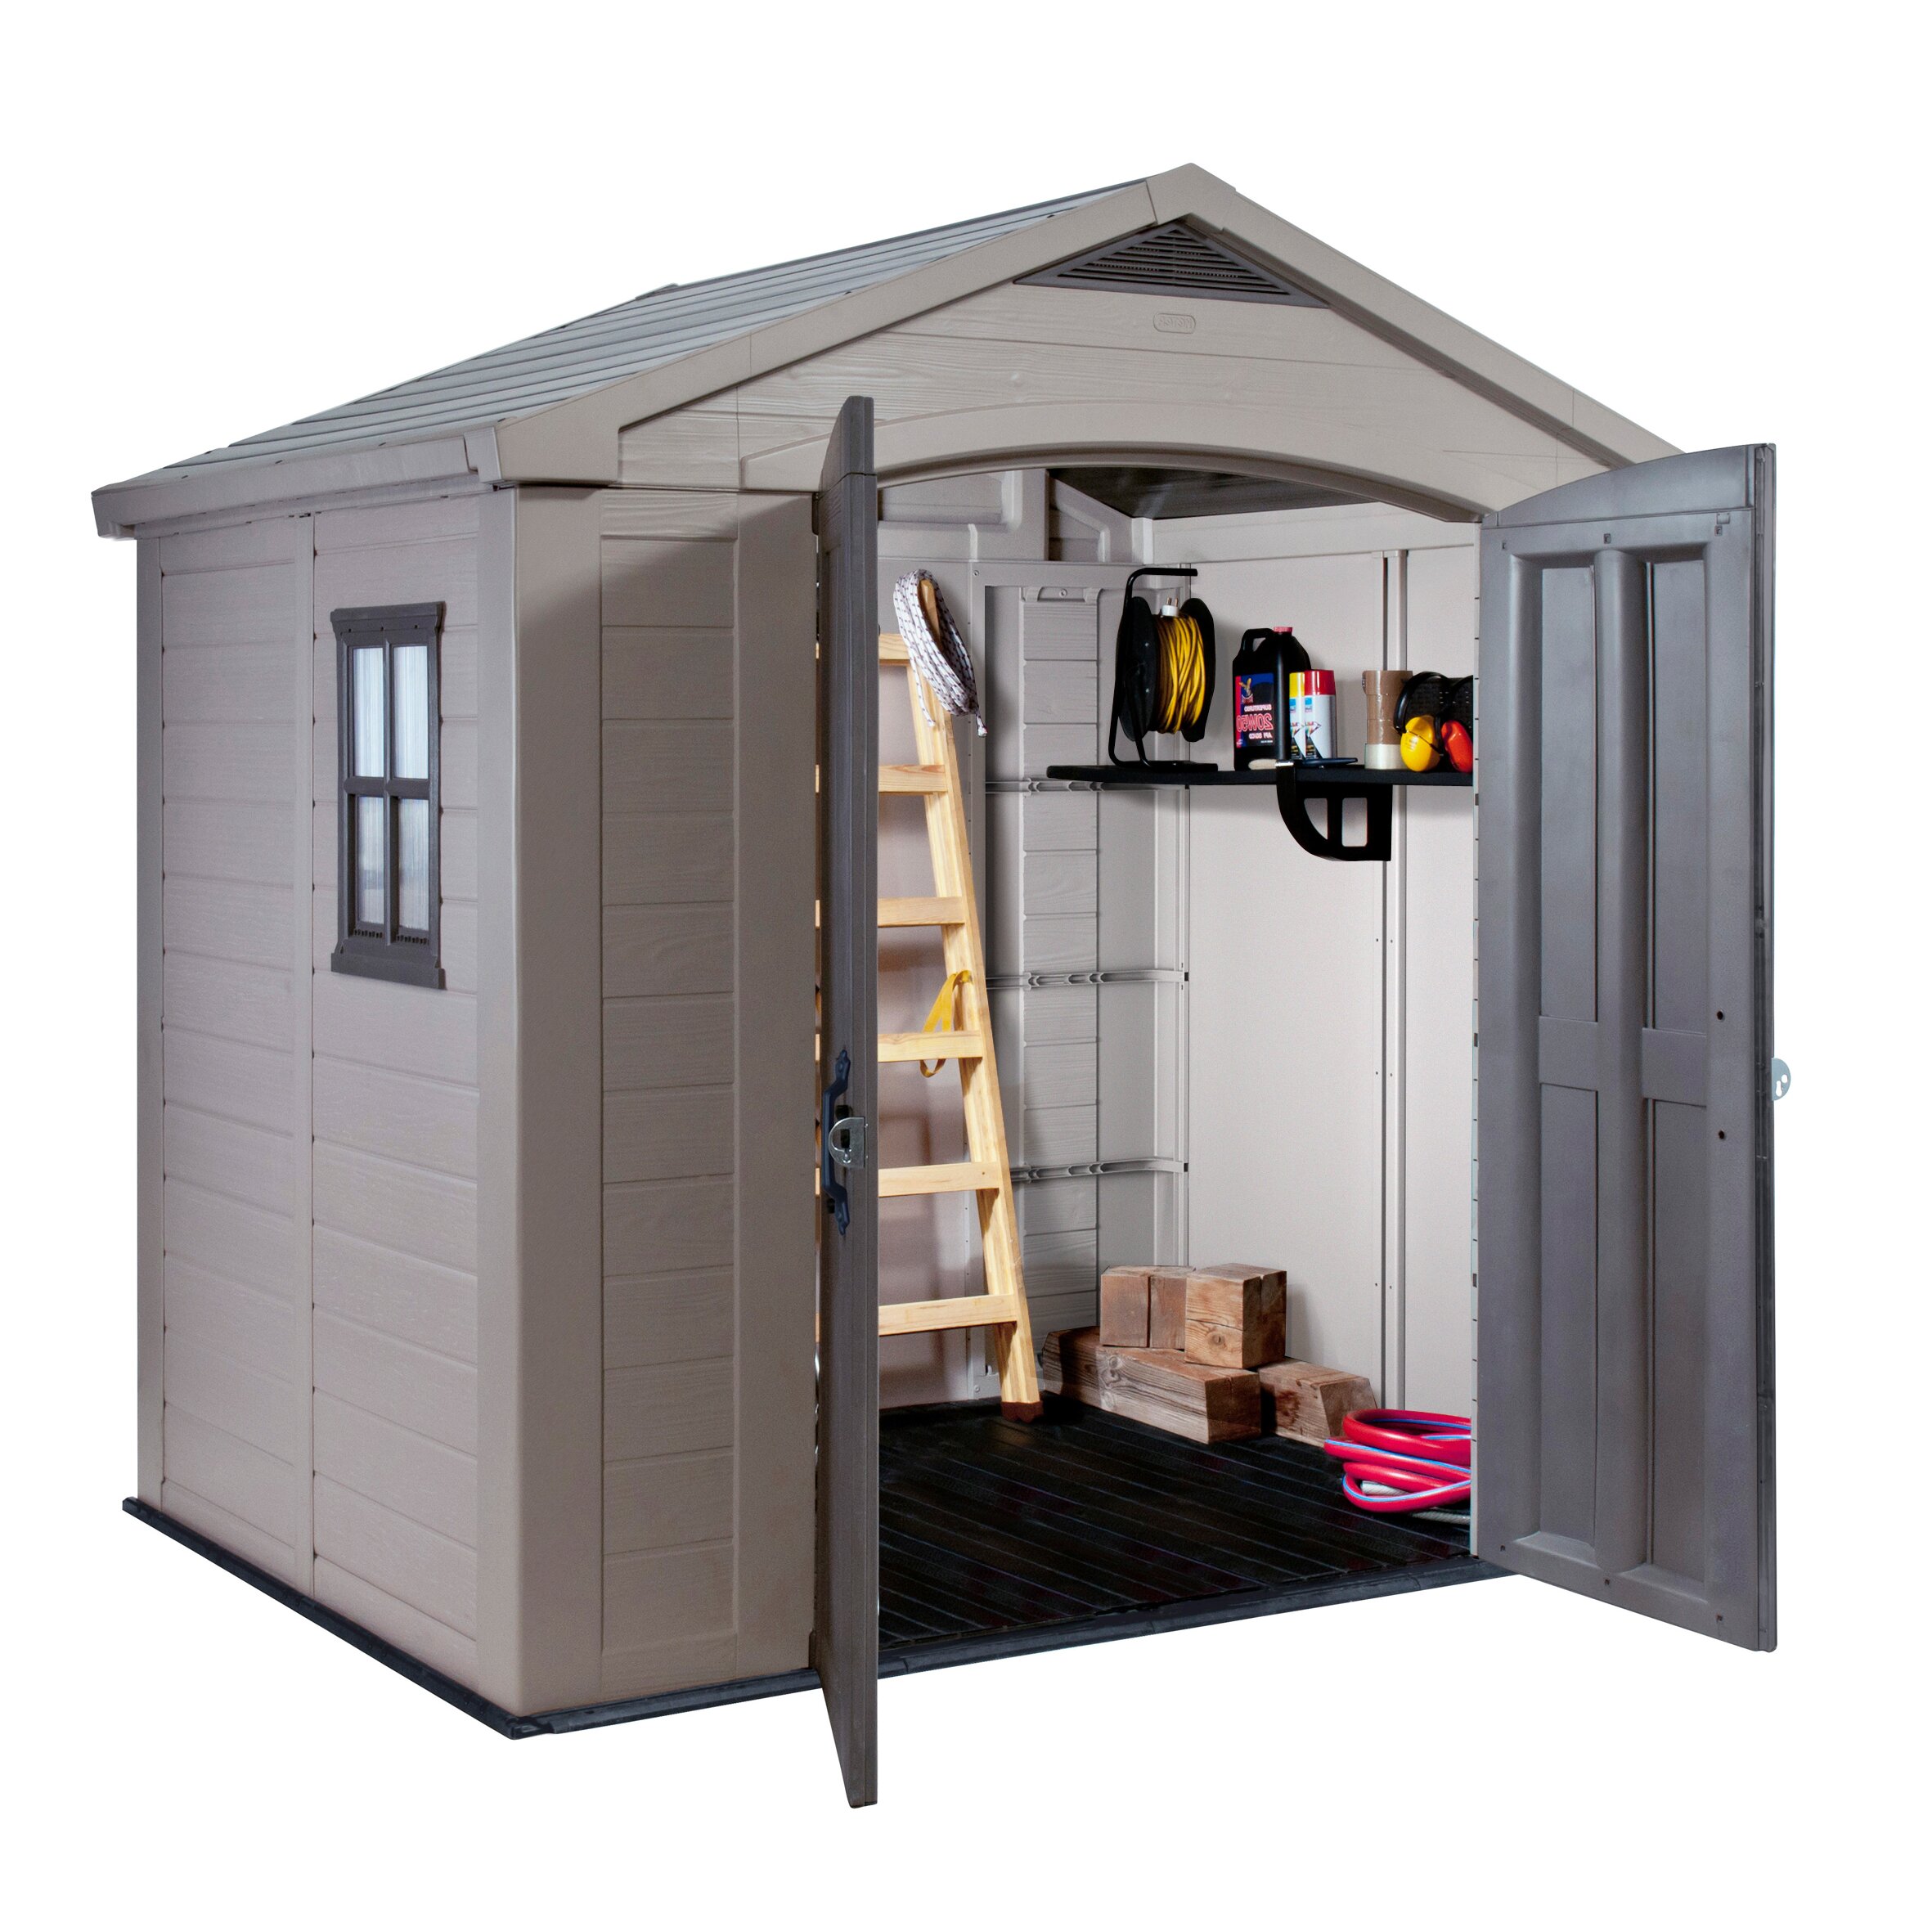 Keter Factor 8 Ft. W x 6 Ft. D Resin Storage Shed 